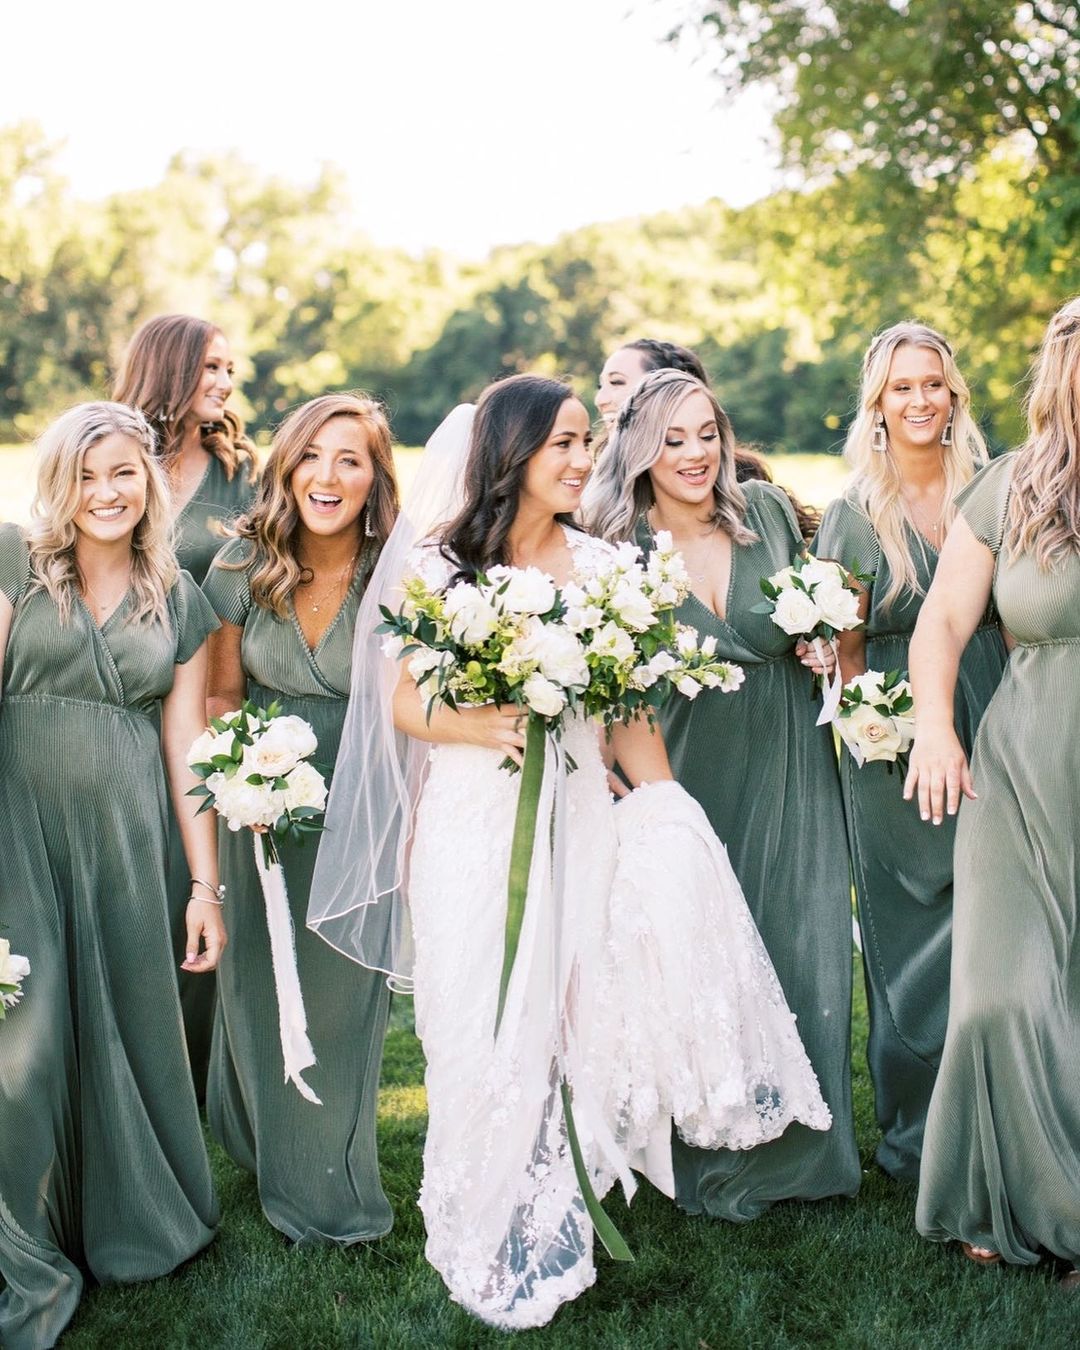 FAQ: What Are the Typical Bridesmaid Responsibilities? - Oklahoma News